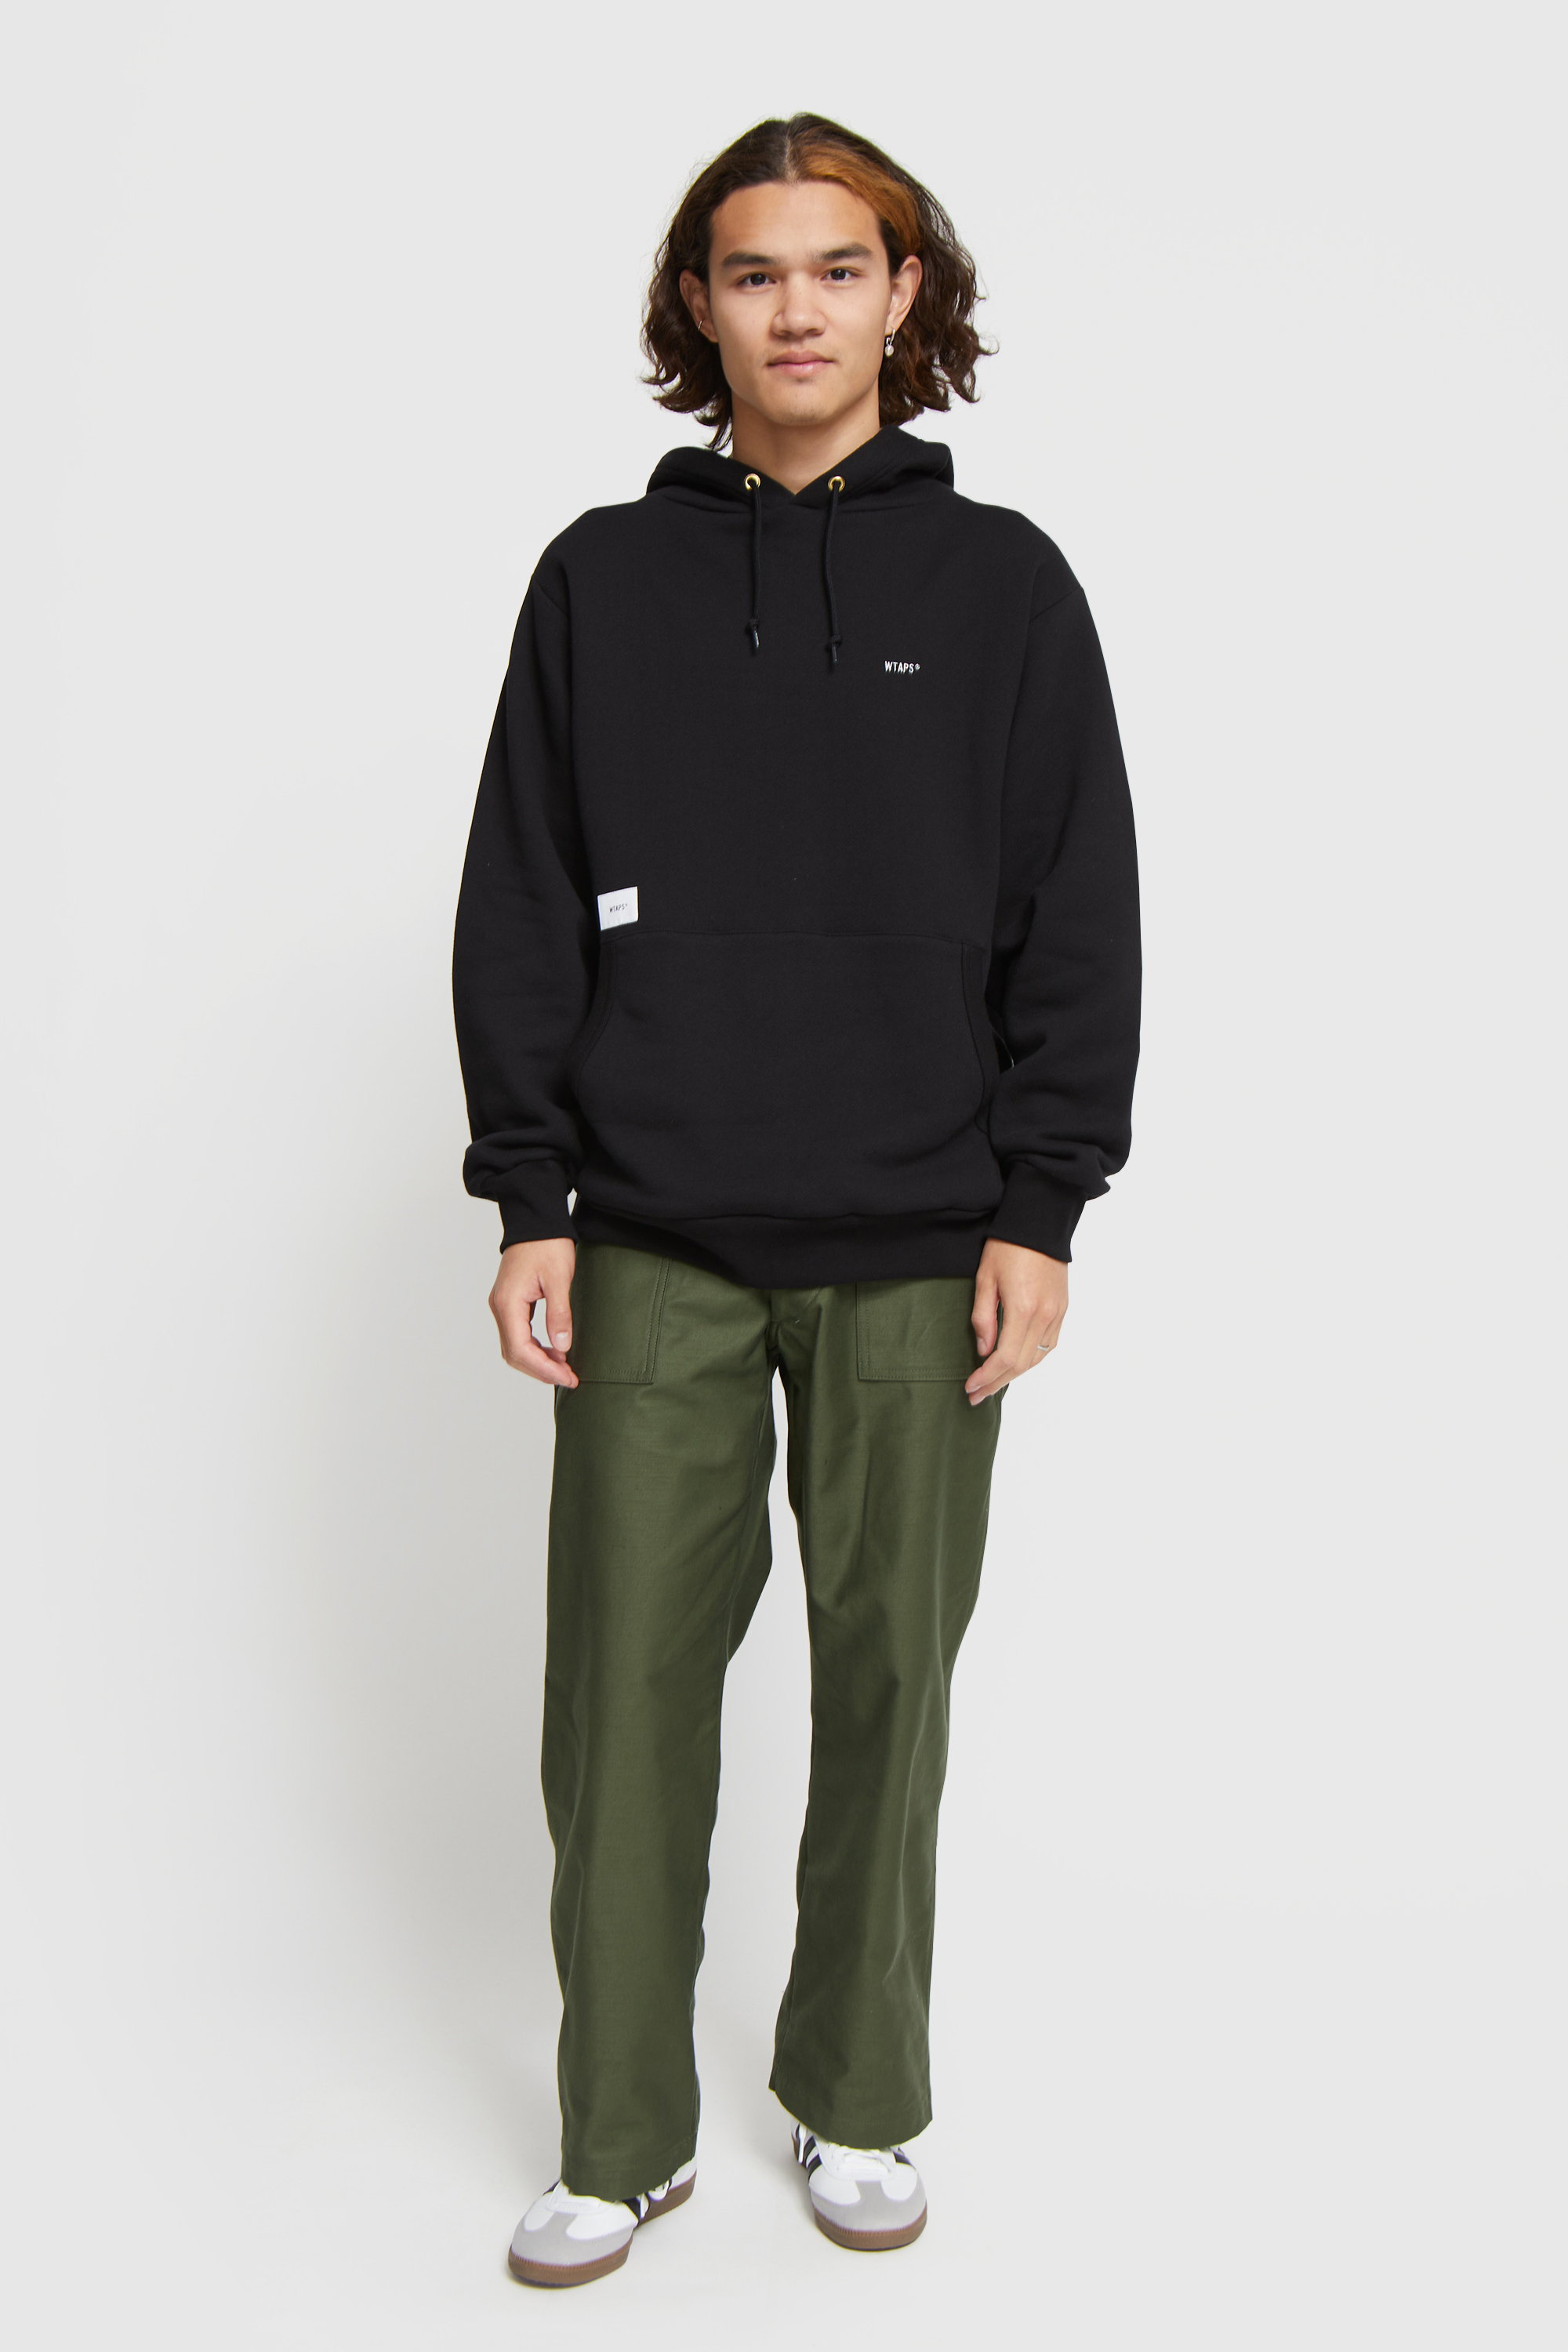 WTAPS FLAT HOODED COTTON